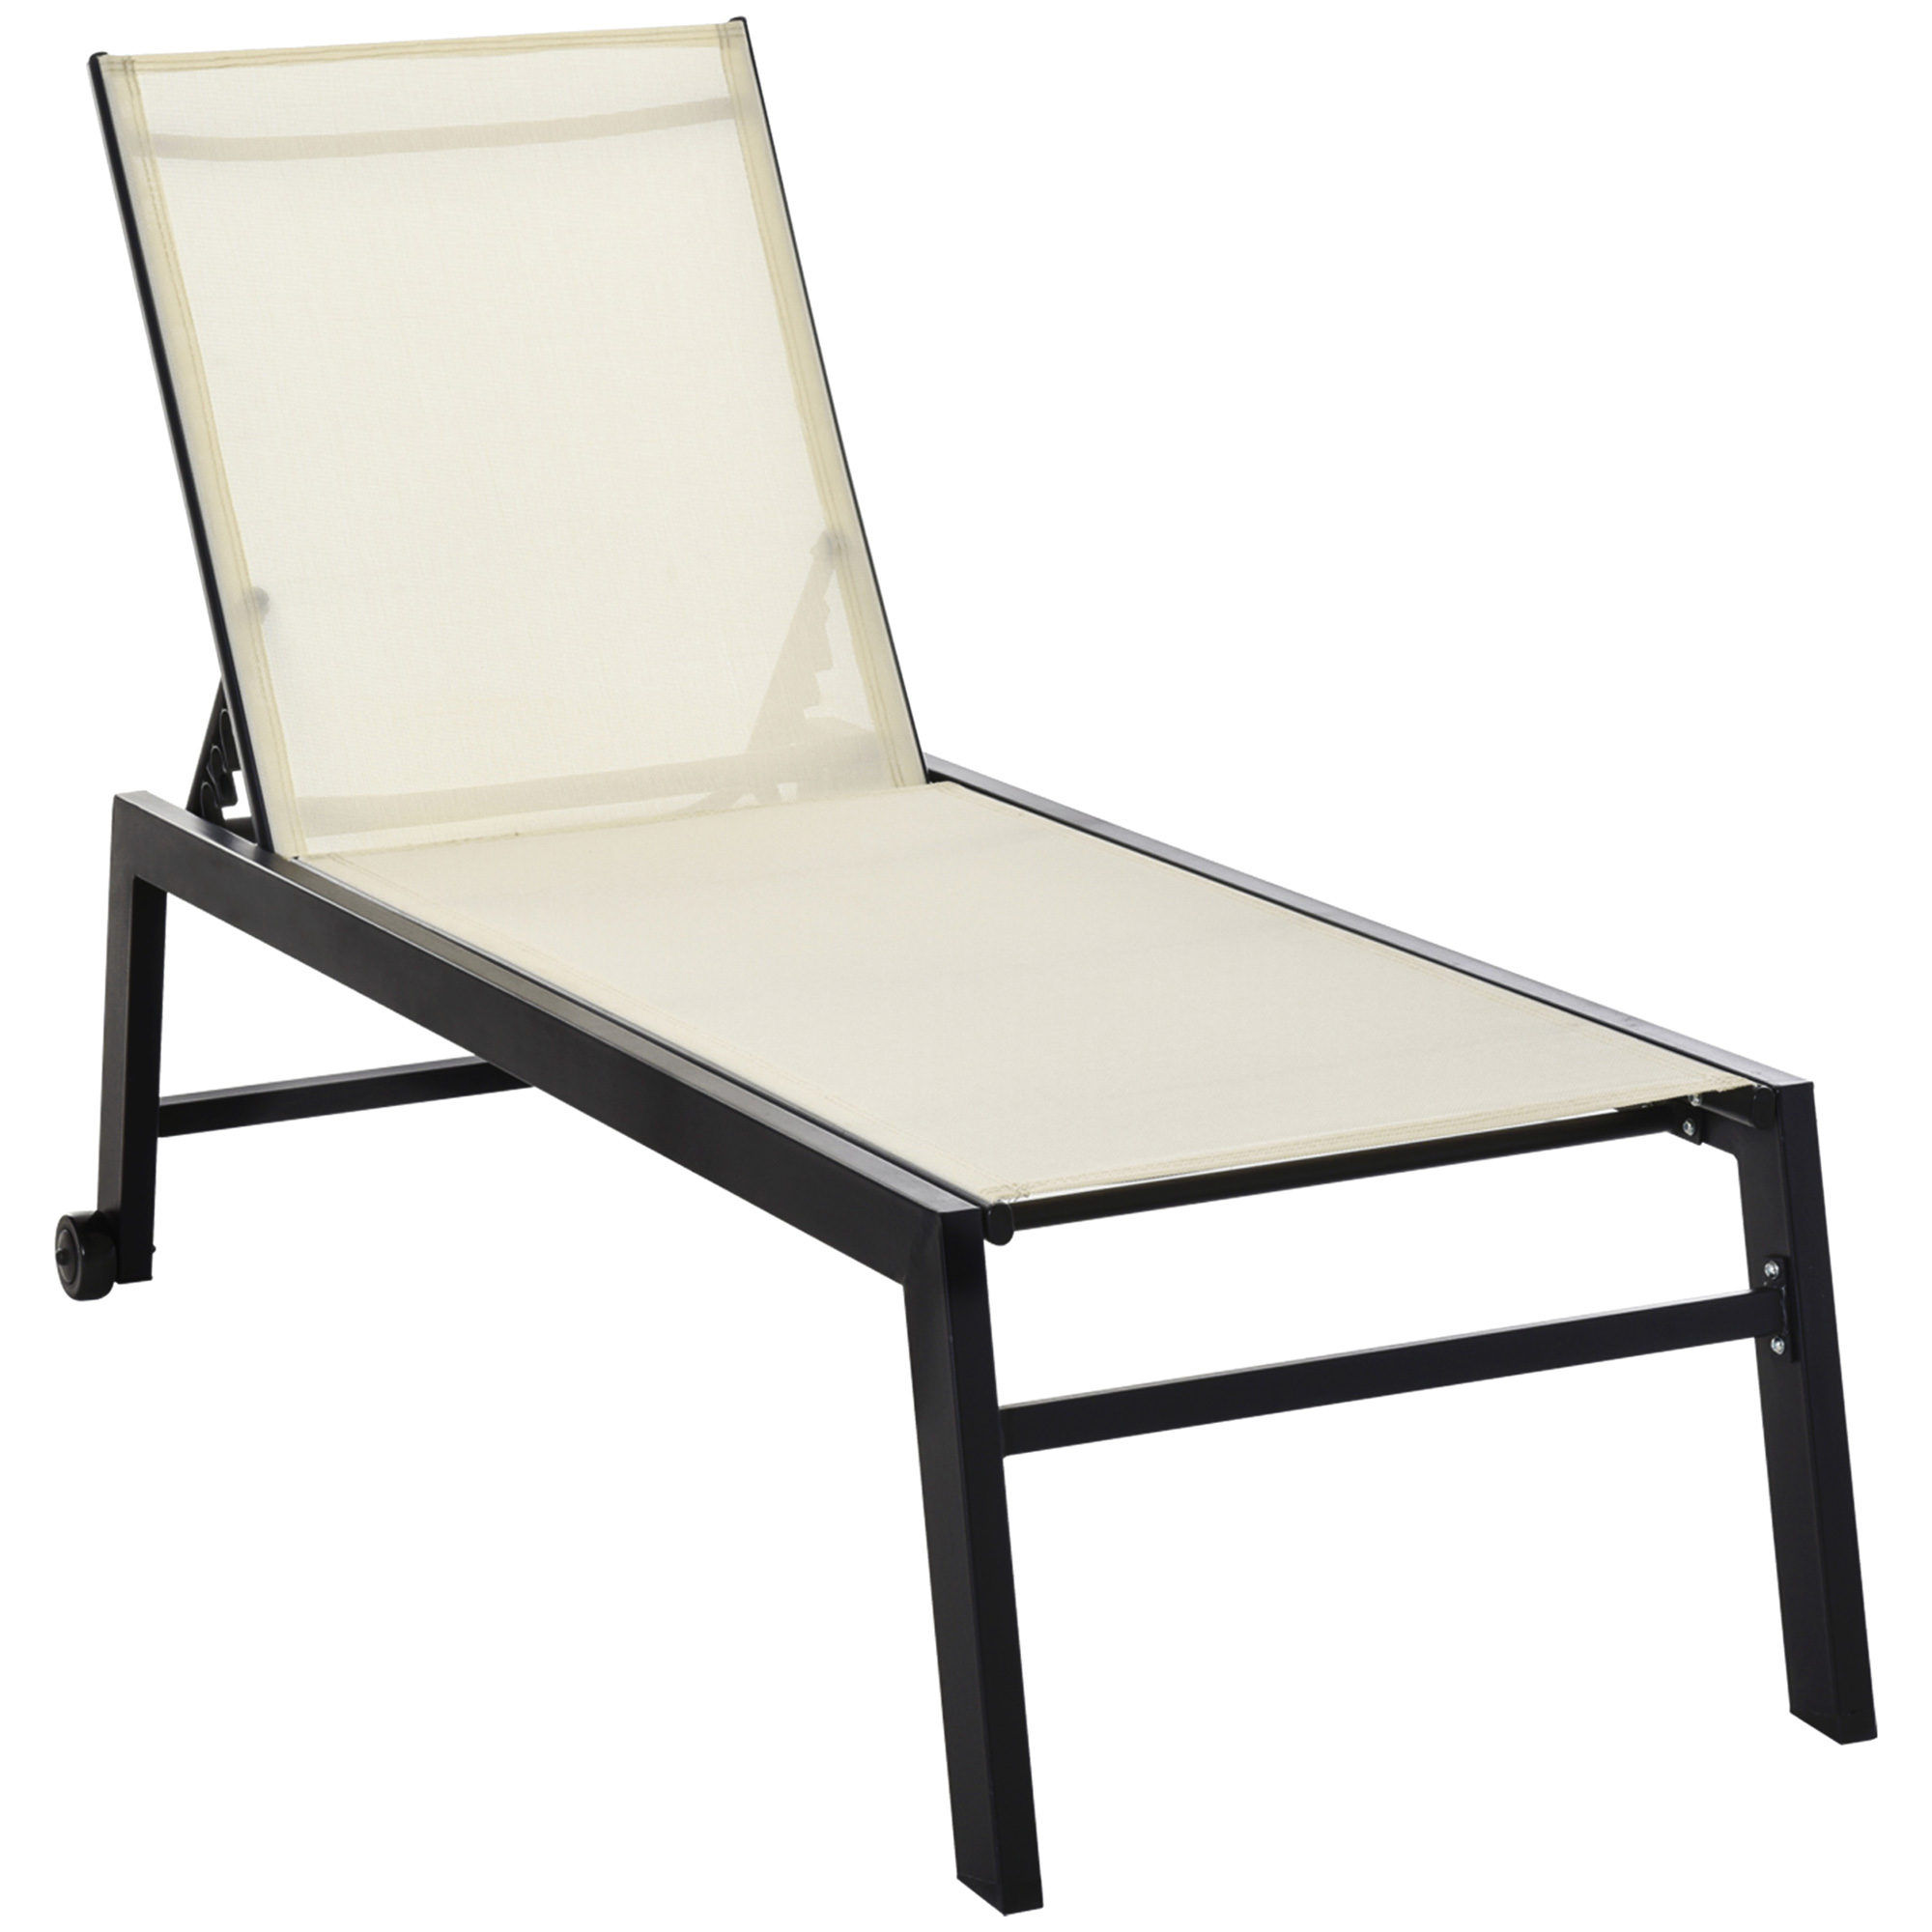 Outsunny Patio Chaise Lounge Chair with 5-Position Backrest, White - image 1 of 9